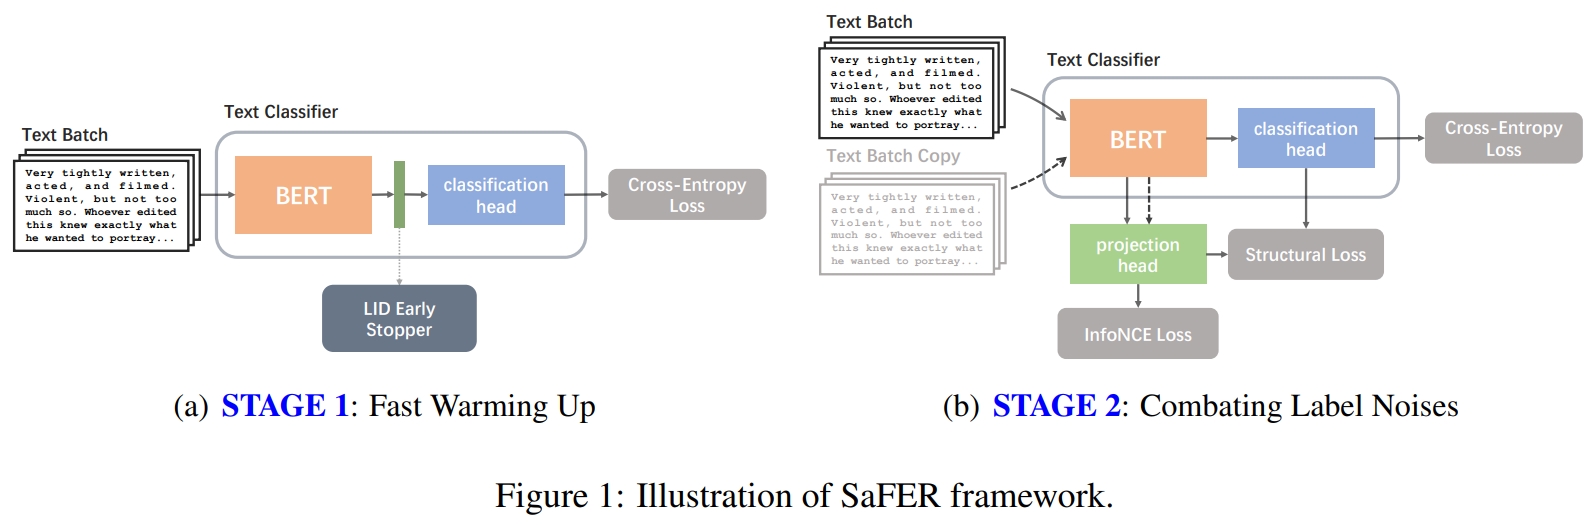 SaFER: A Robust and Efficient Framework for Finetuning BERT-based Classifier with Noisy Labels